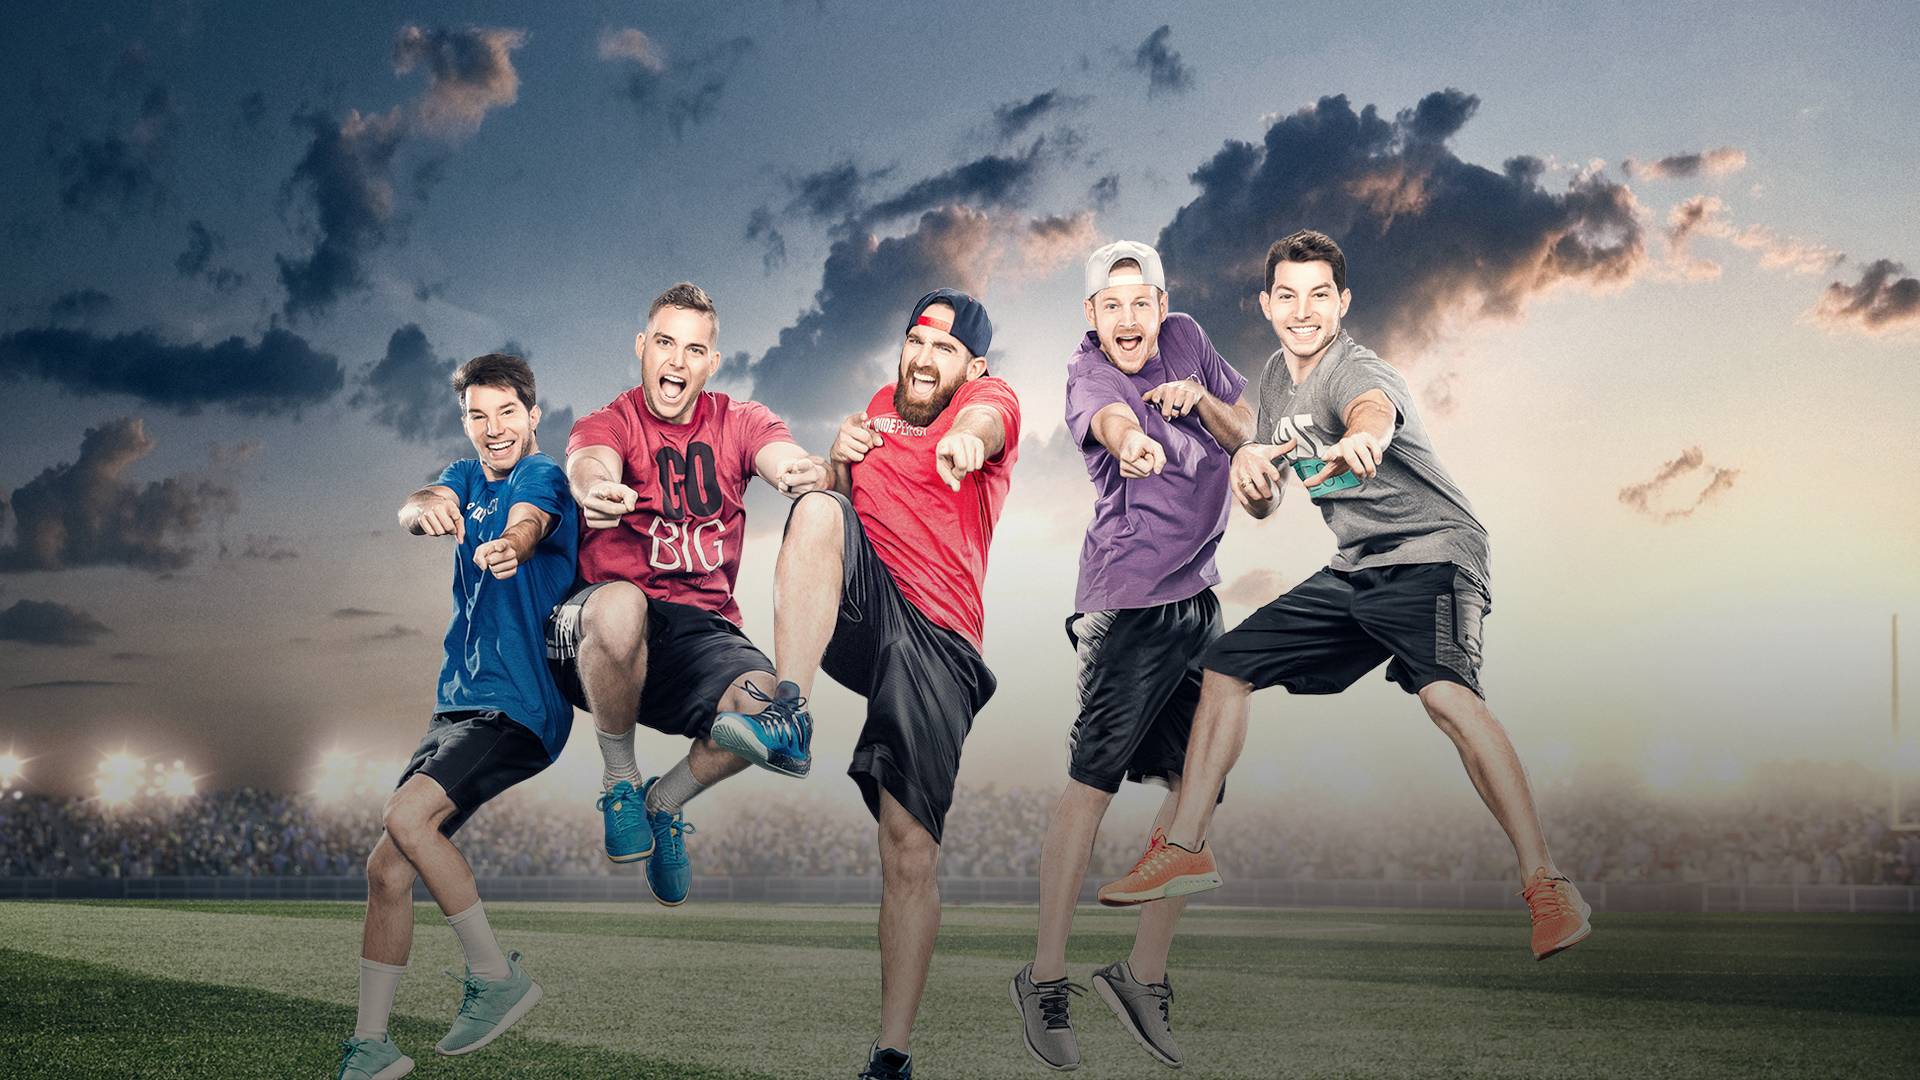 The Dude Perfect Show Tv Series Cmt